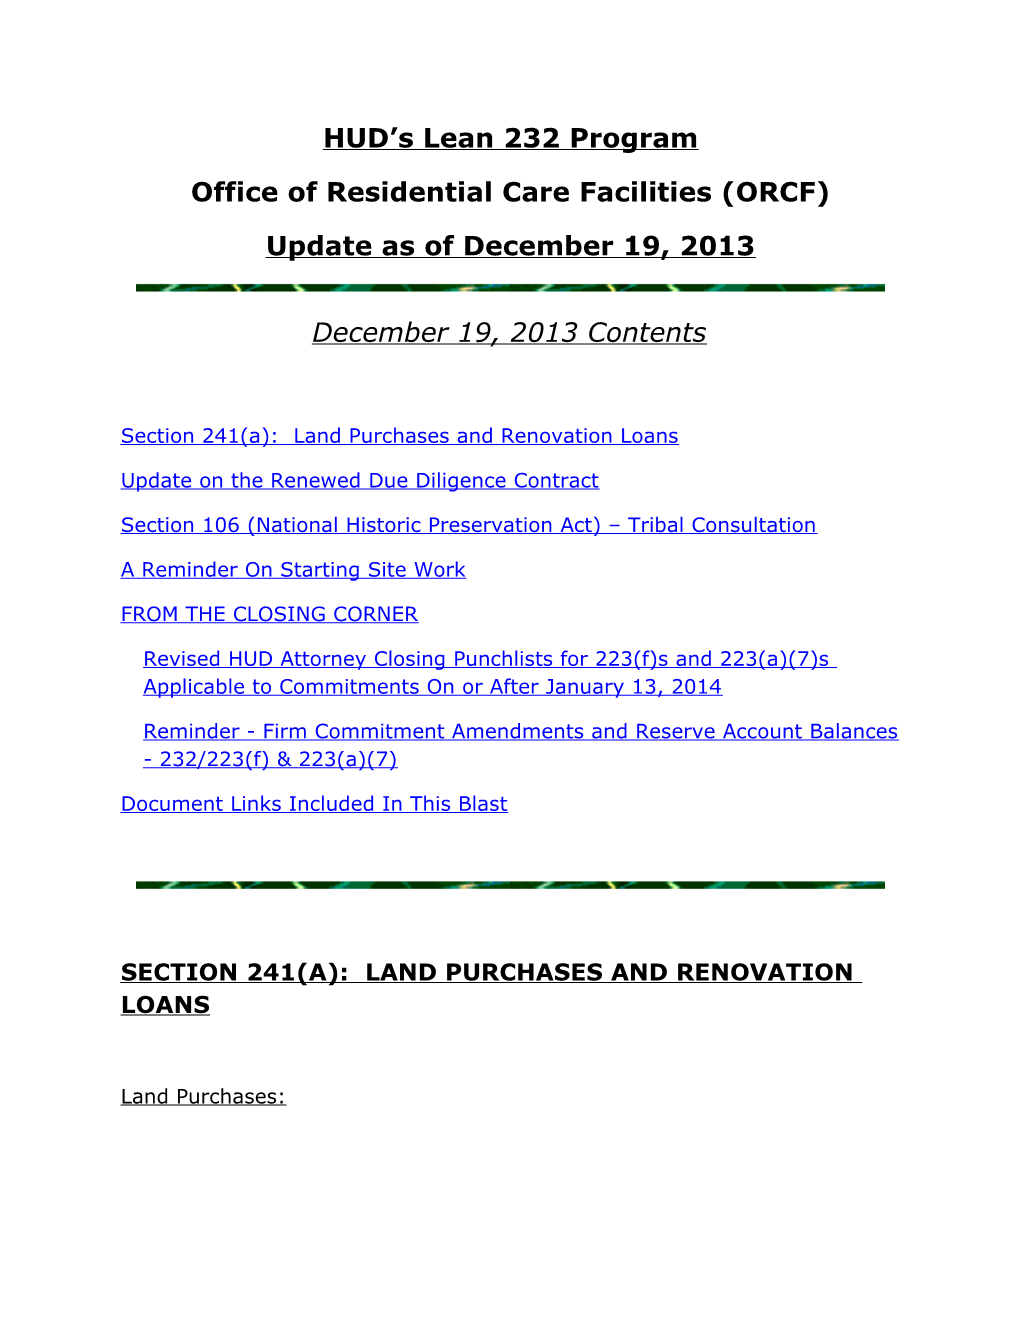 Office of Residential Care Facilities (ORCF) s1